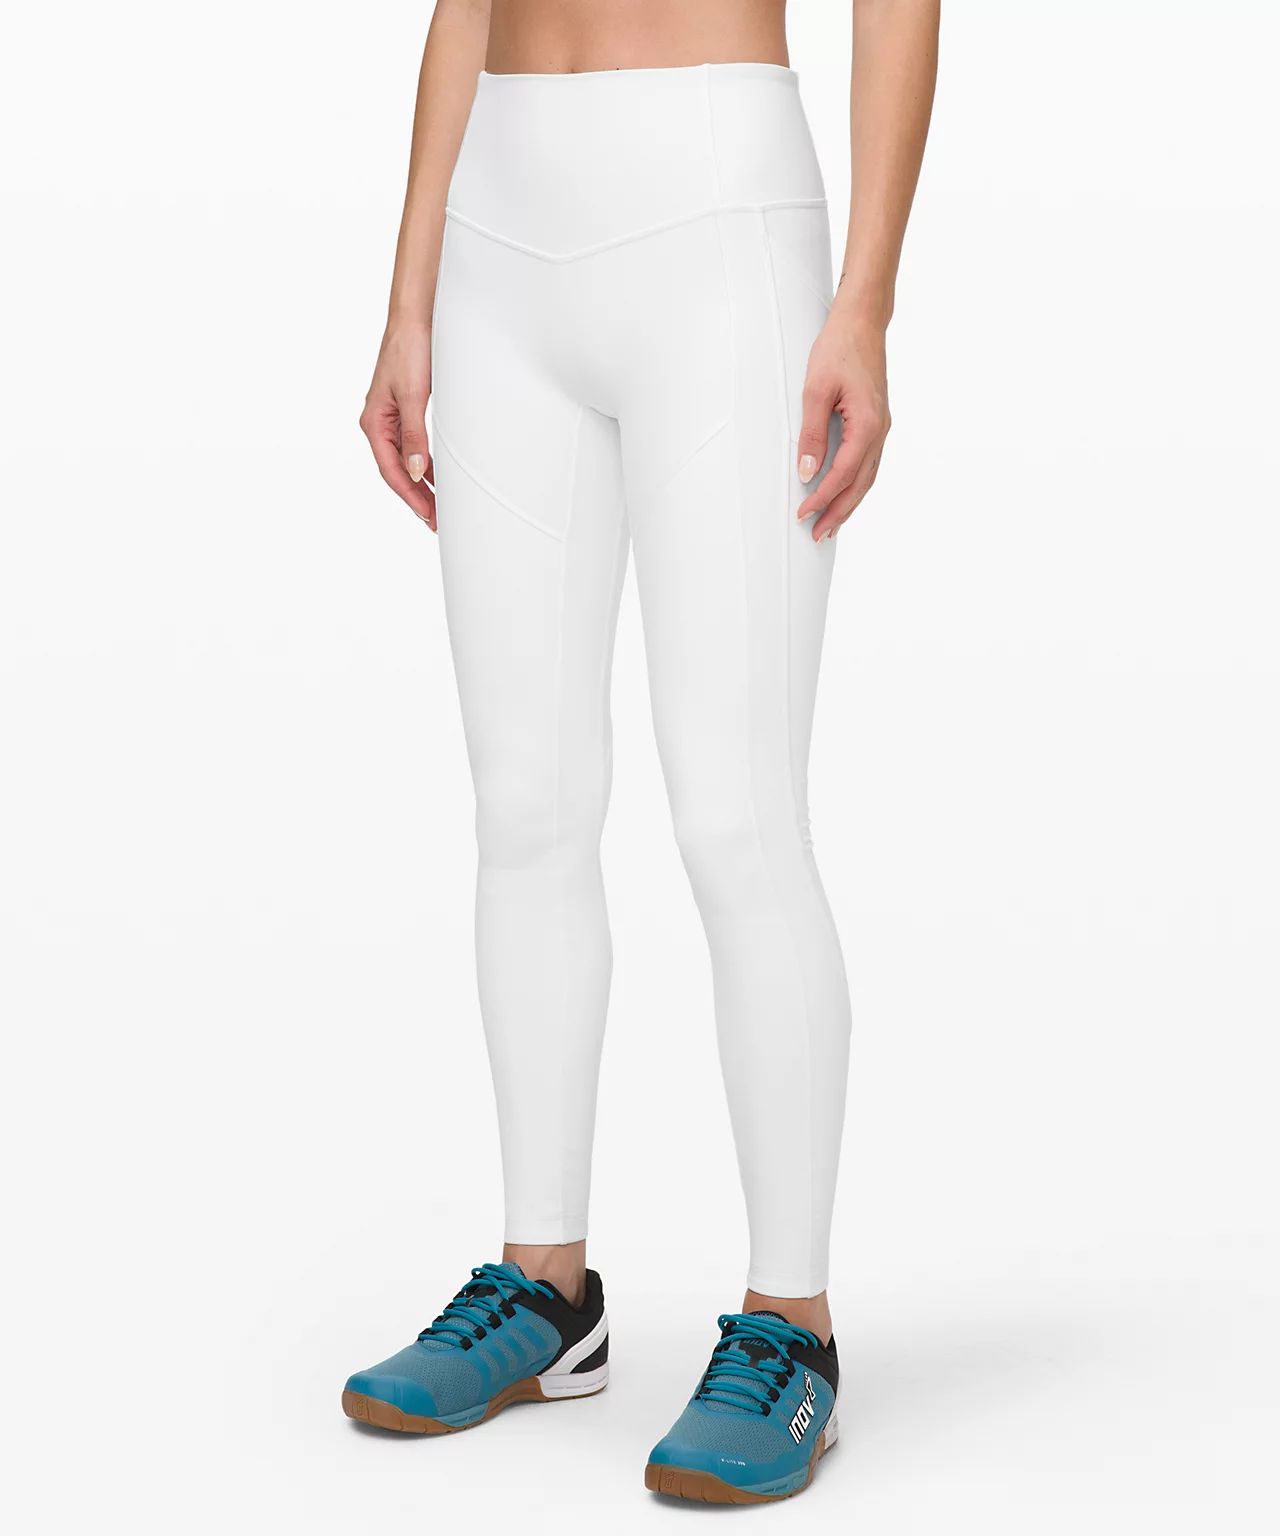 All The Right Places Pant II 28" Online Only | Lululemon (US)